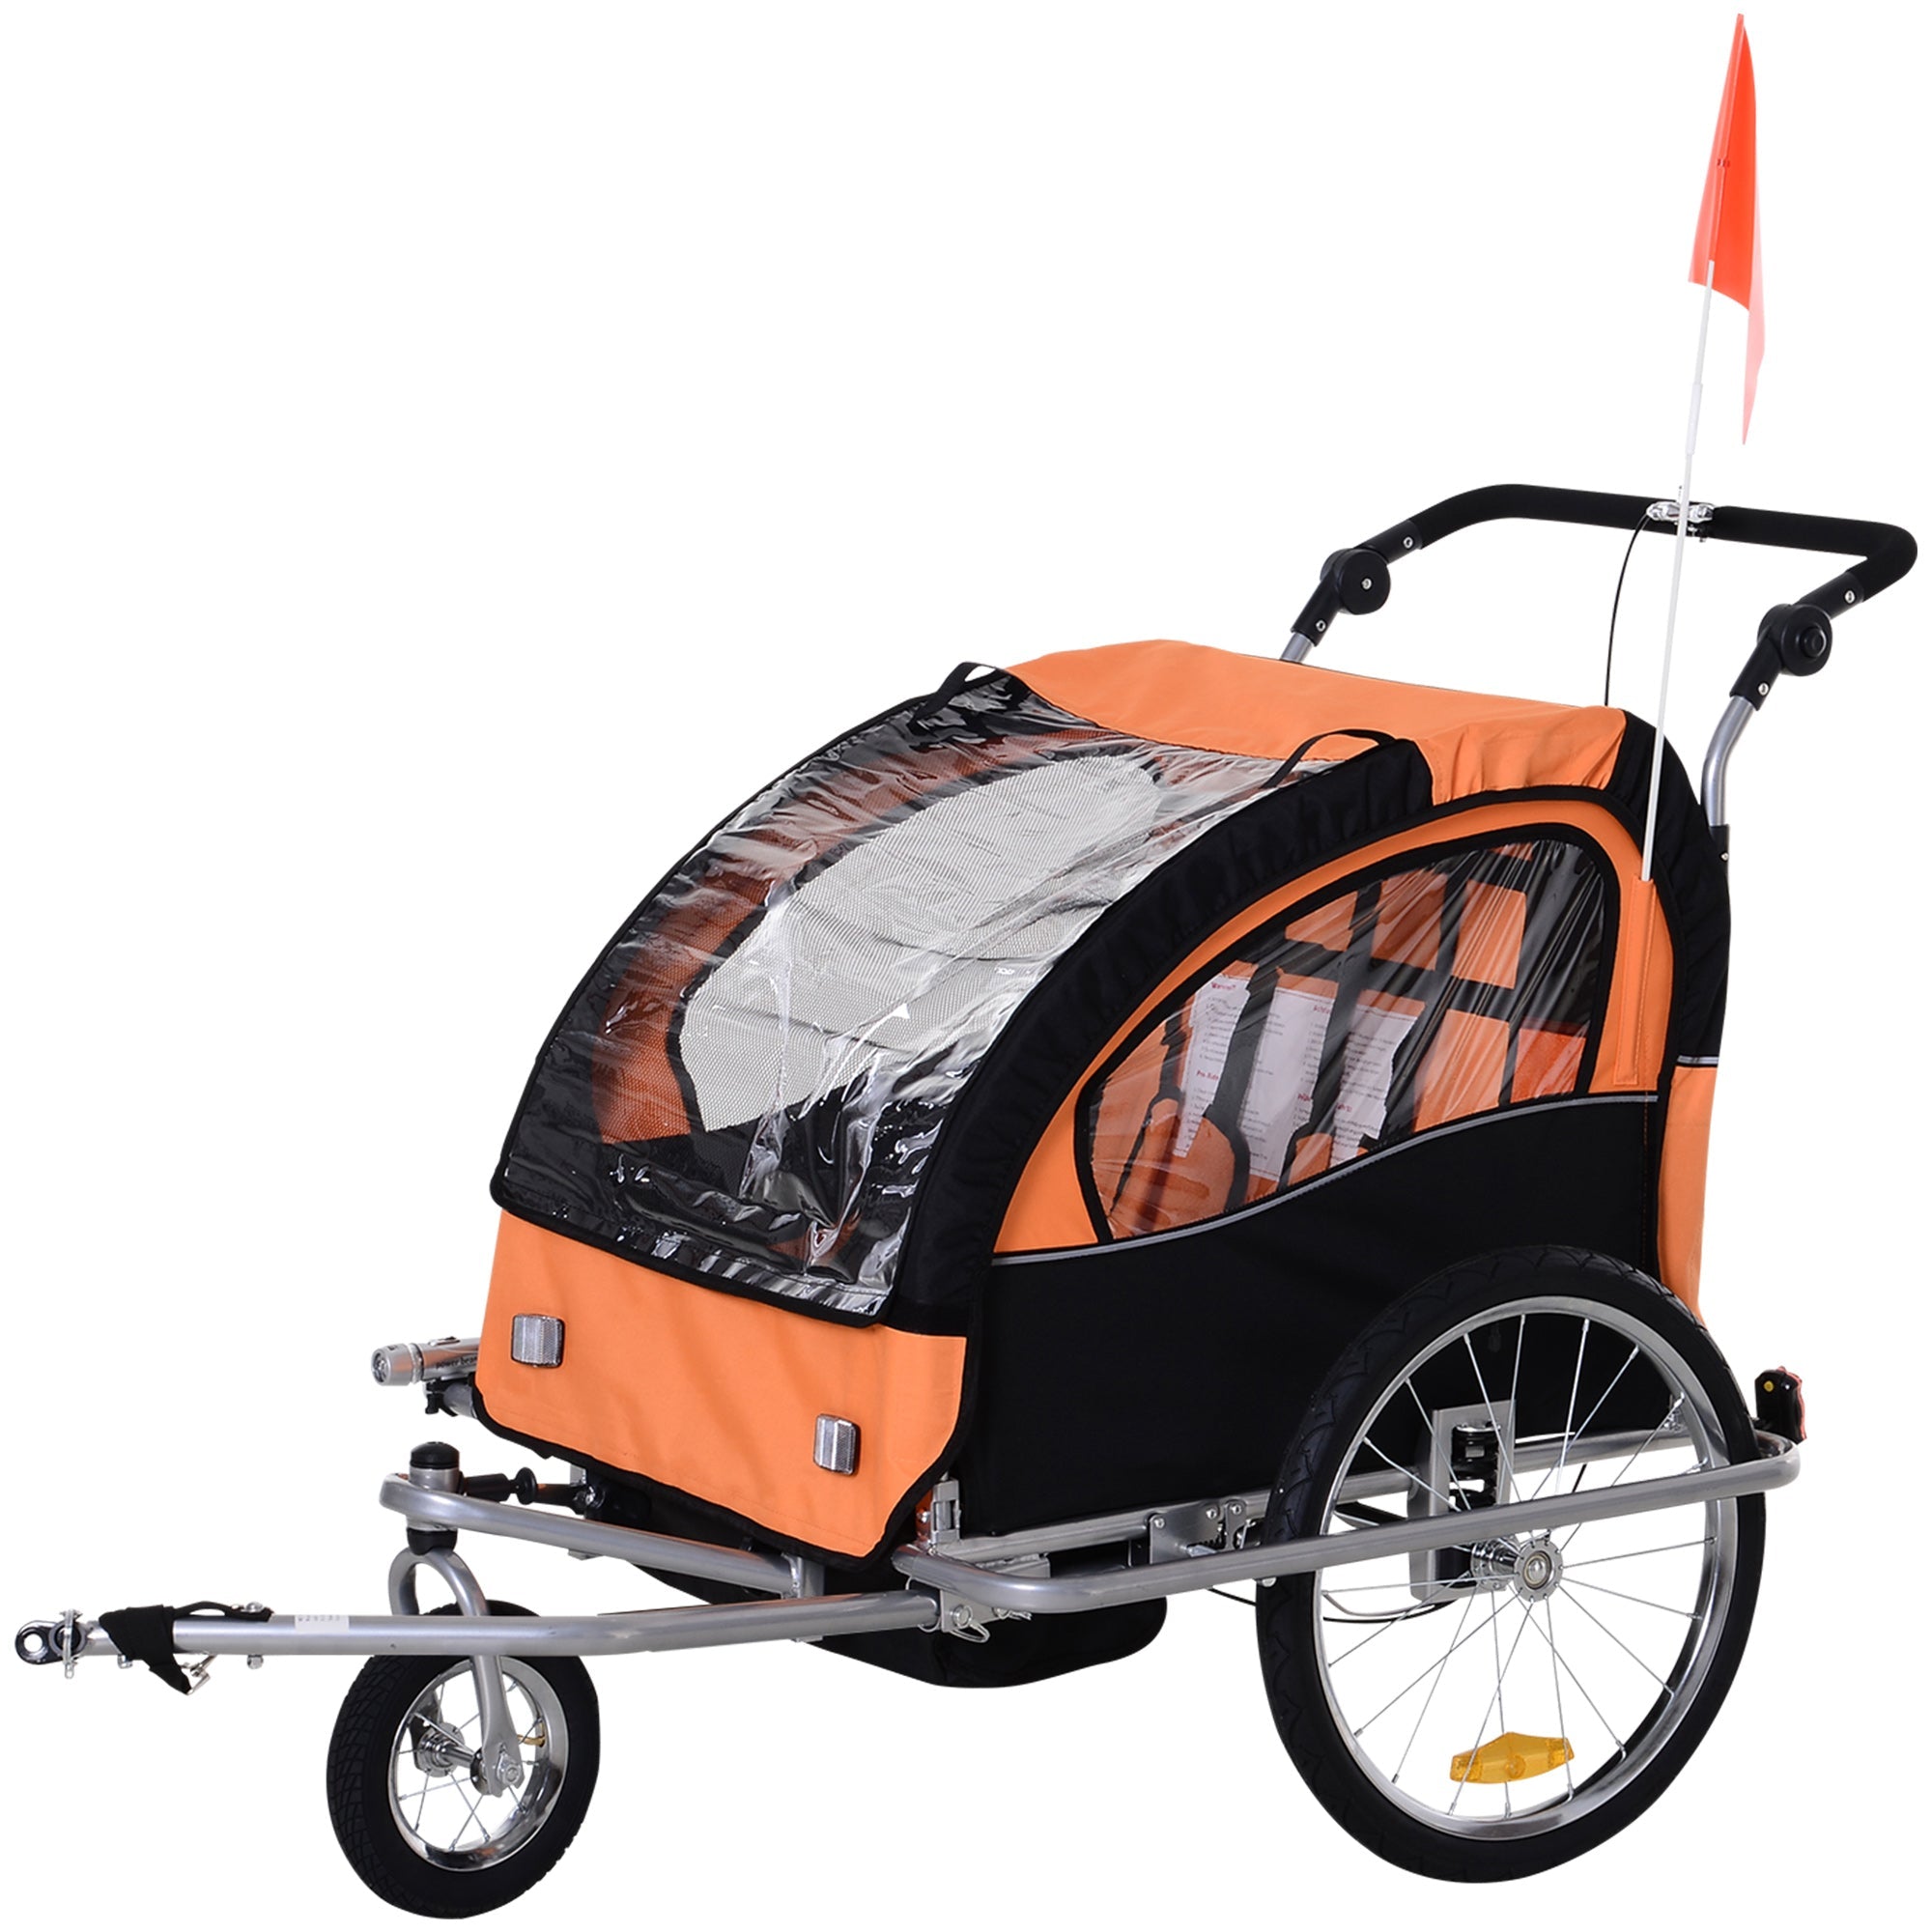 Elite 360 Swivel Bike Trailer for Kids Double Child Two-Wheel Bicycle Cargo Trailer With 2 Security Harnesses, Orange